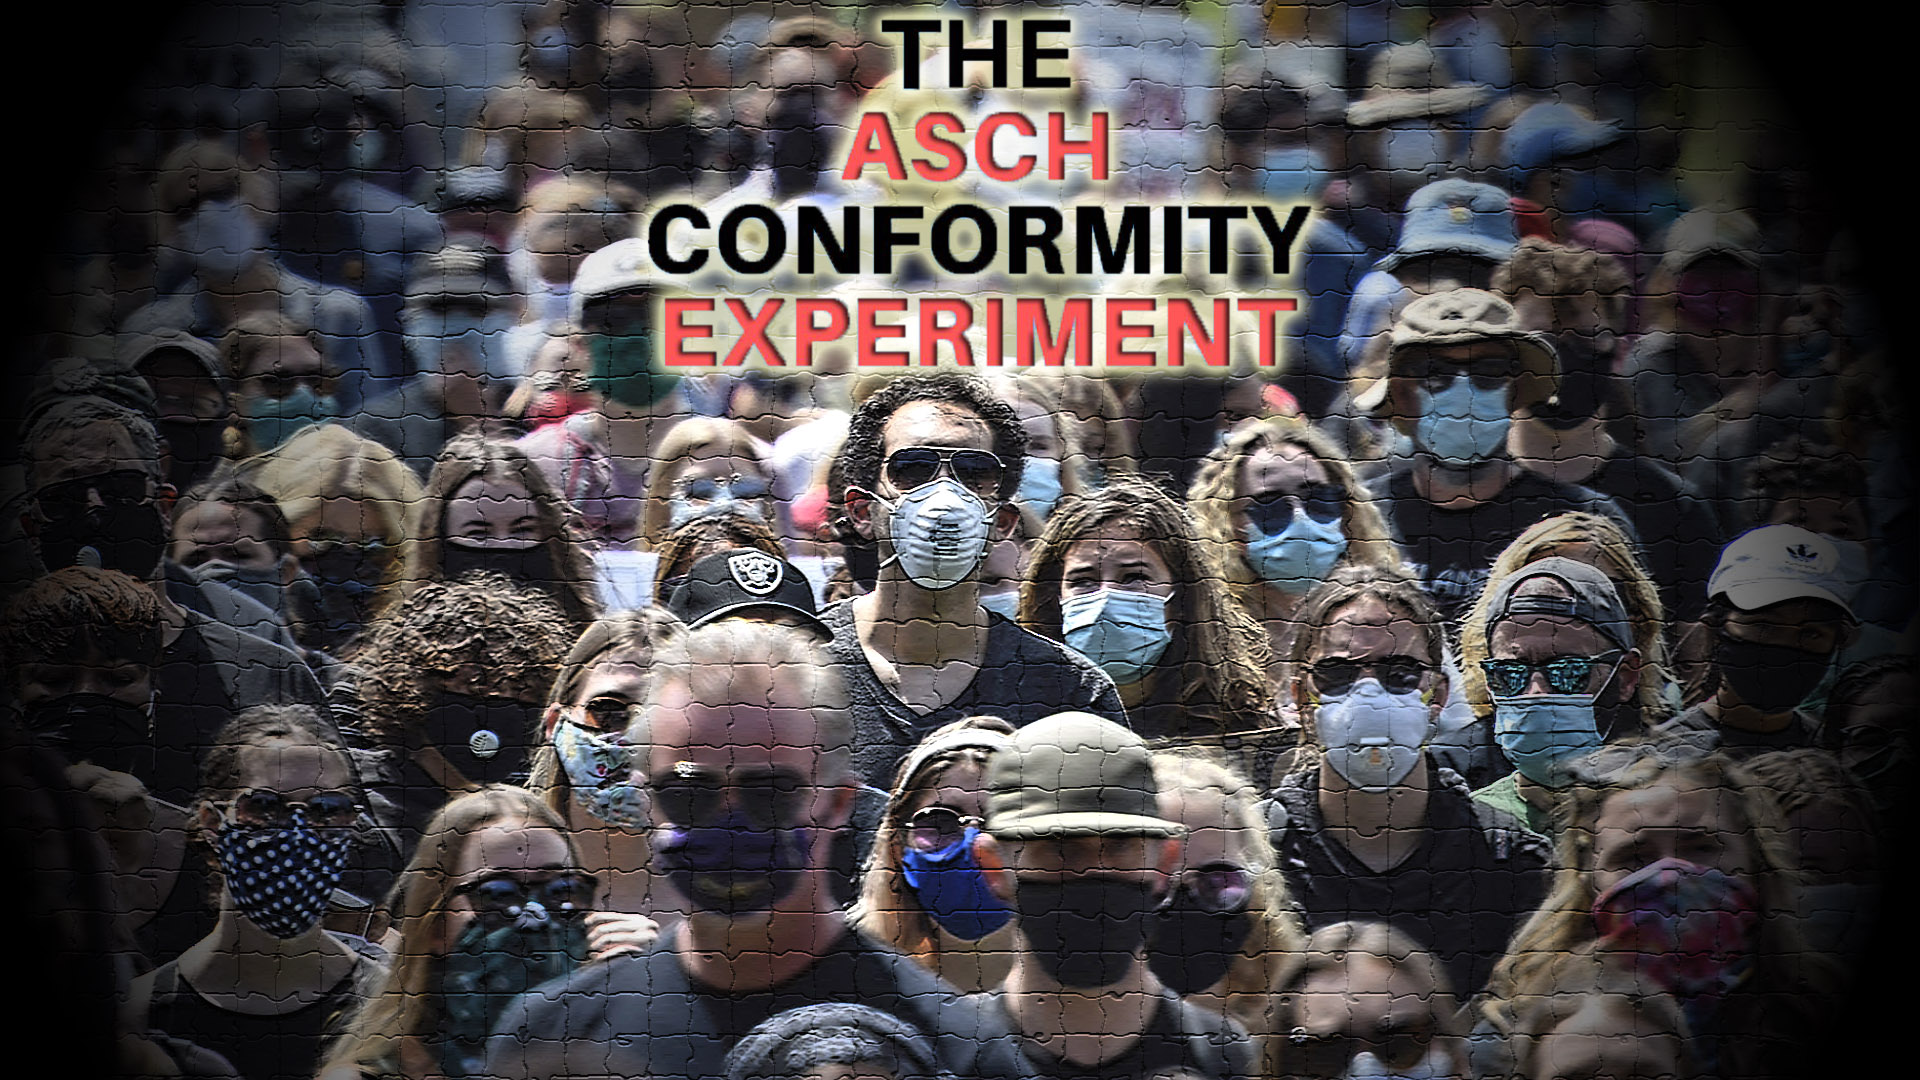 MASKS & THE MANUFACTURING OF CONFORMITY: WE ARE NOW THE SUBJECTS OF A GIANT ASCH EXPERIMENT!!!